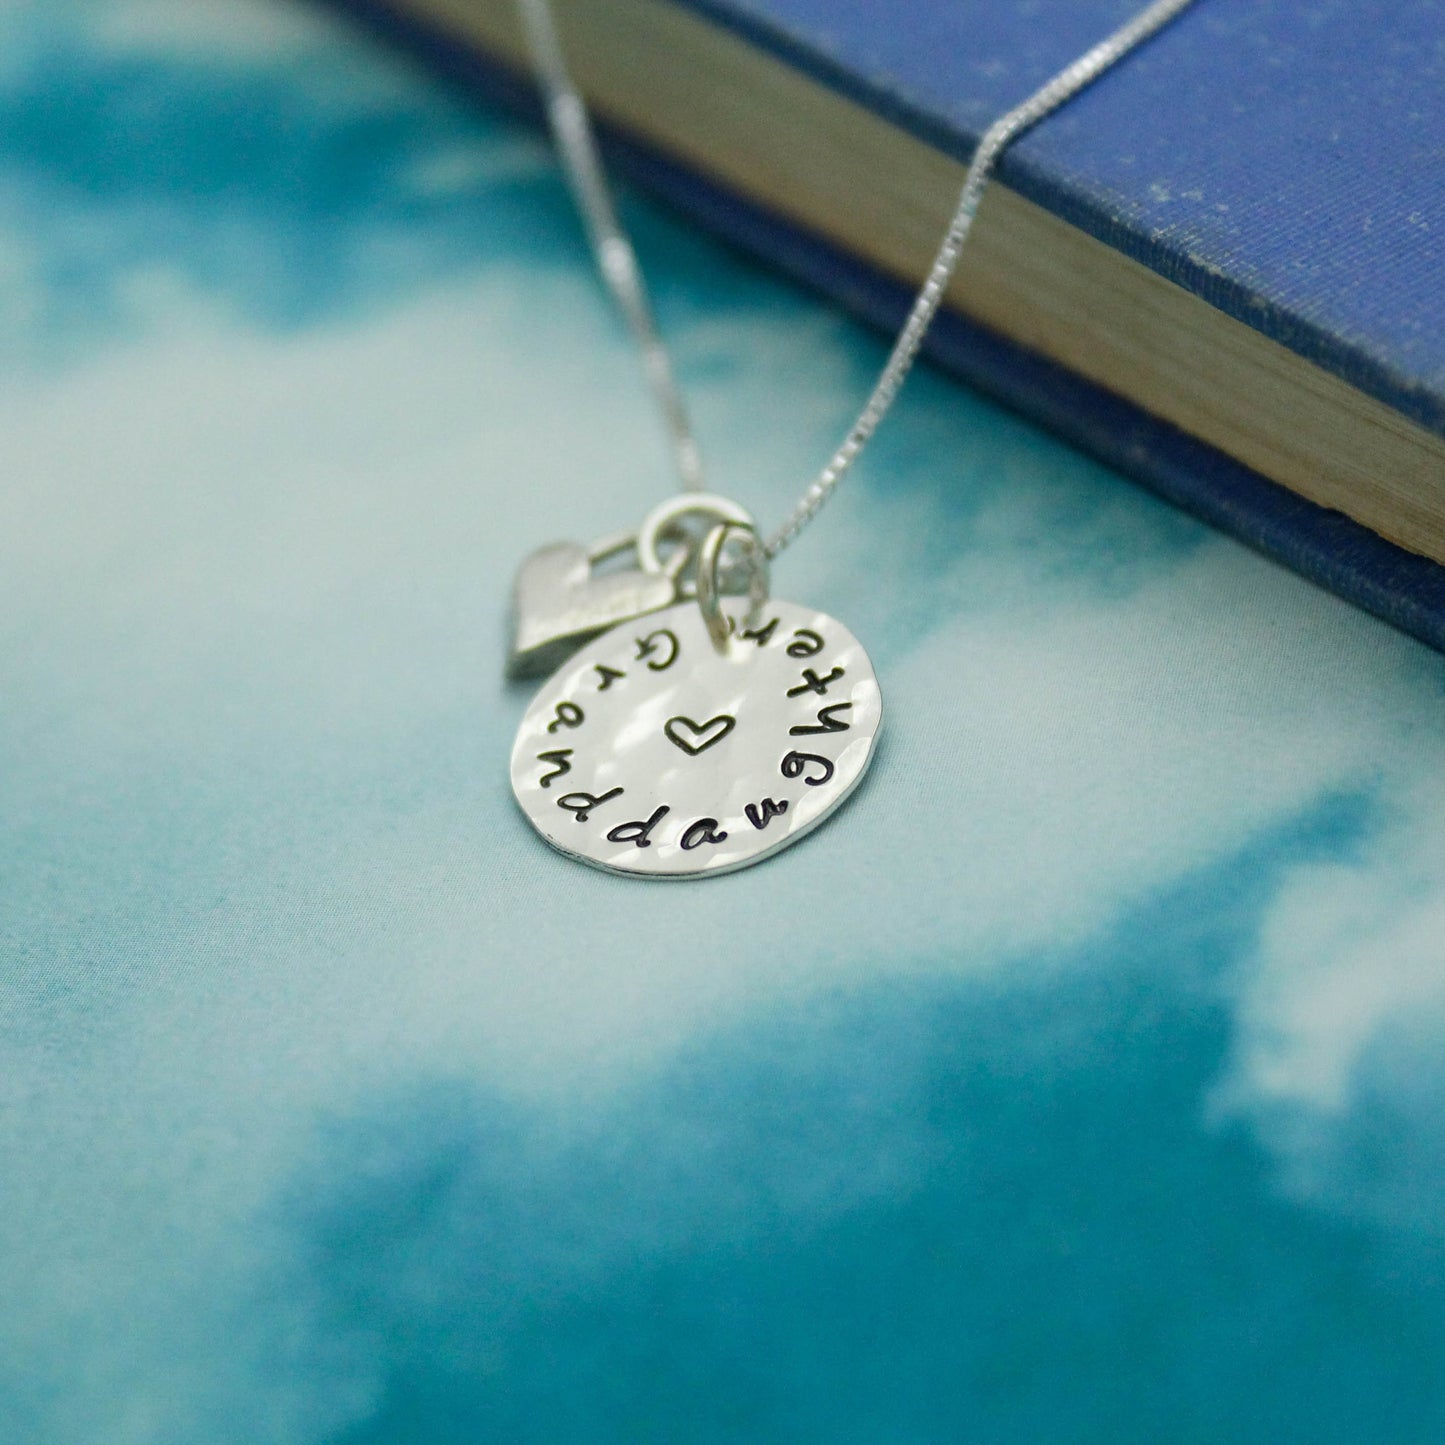 Granddaughter Necklace, Granddaughter Necklace Gift, Sterling Silver Granddaughter Hand Stamped Jewelry, Cute Gift for Granddaughters